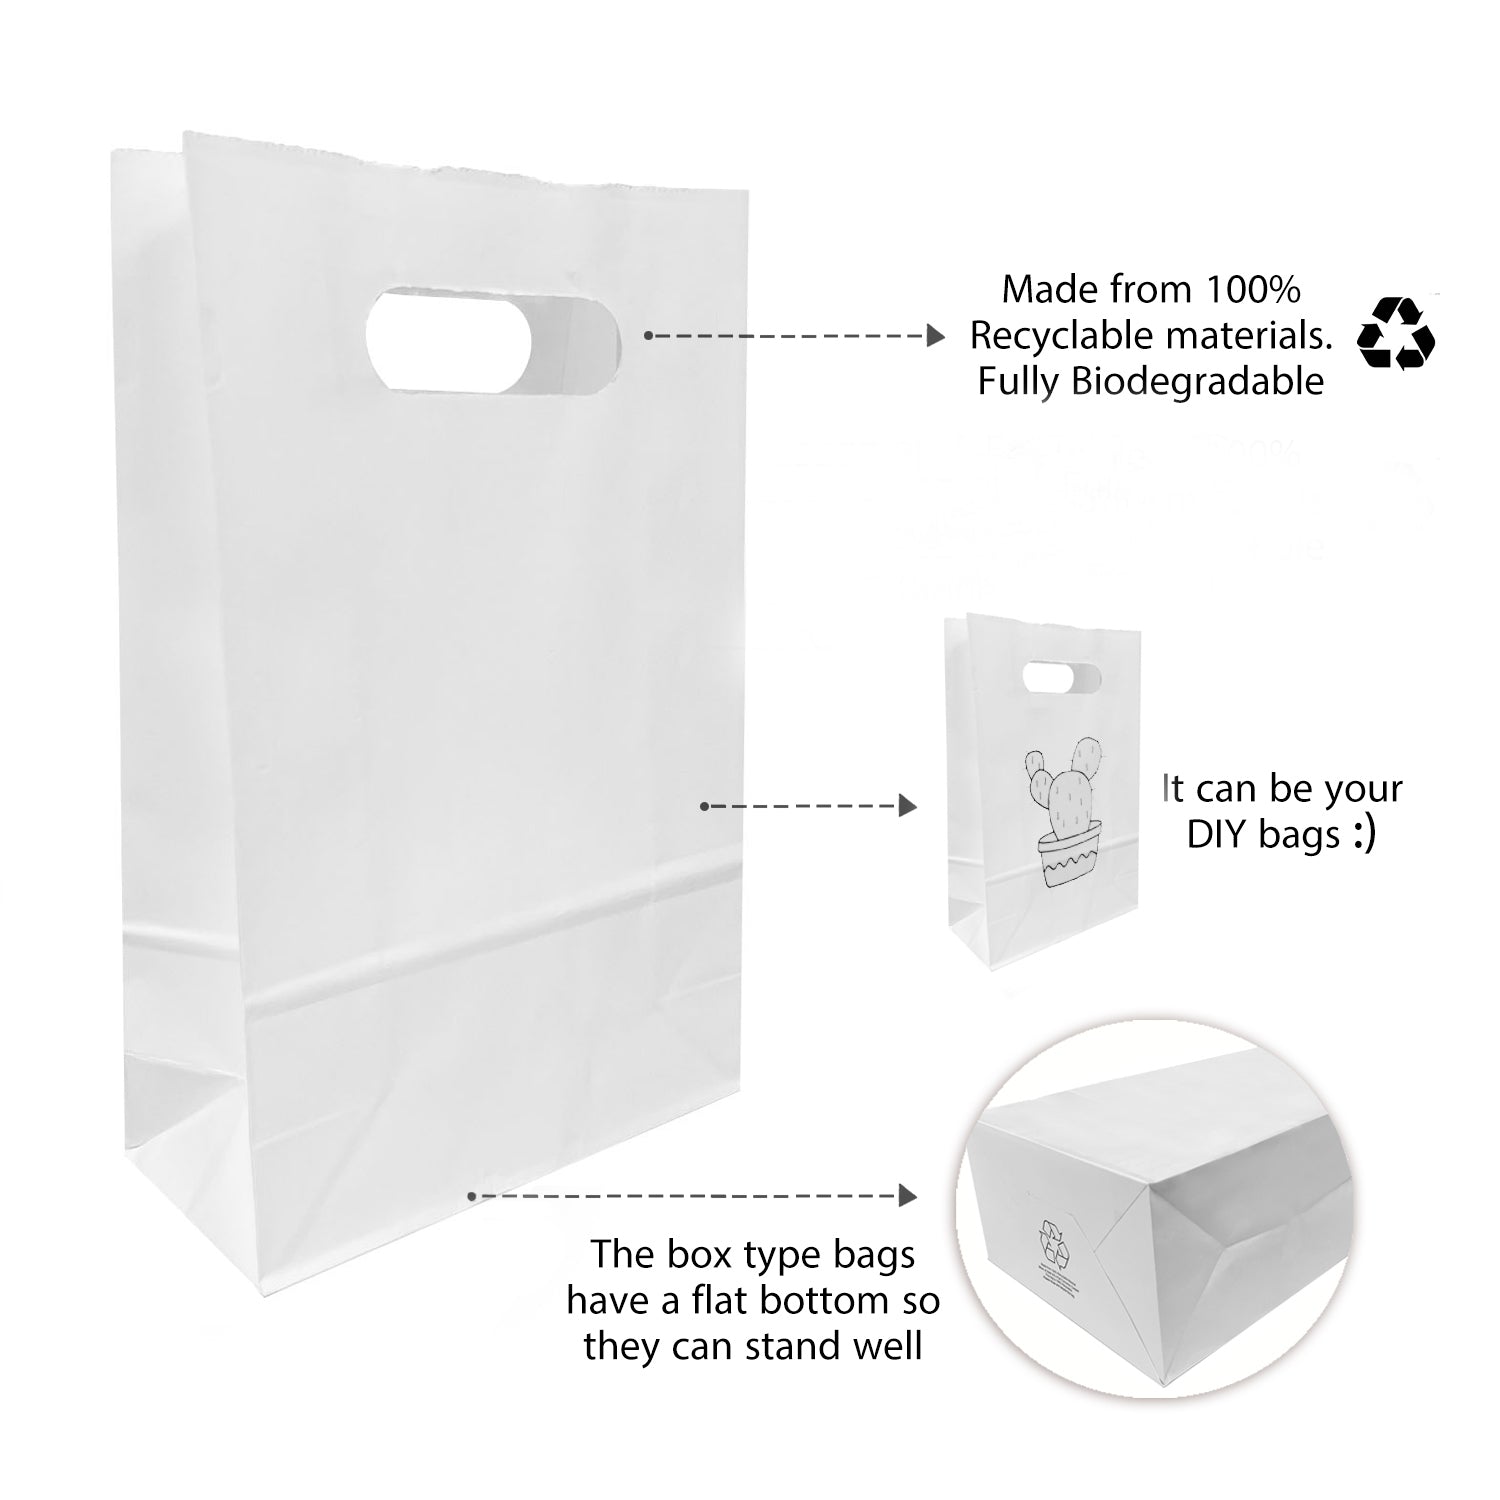 250pcs, Snack, 7 1/8x3 1/4x10 3/4 inches, White Paper Bags, with Die Cut Handles